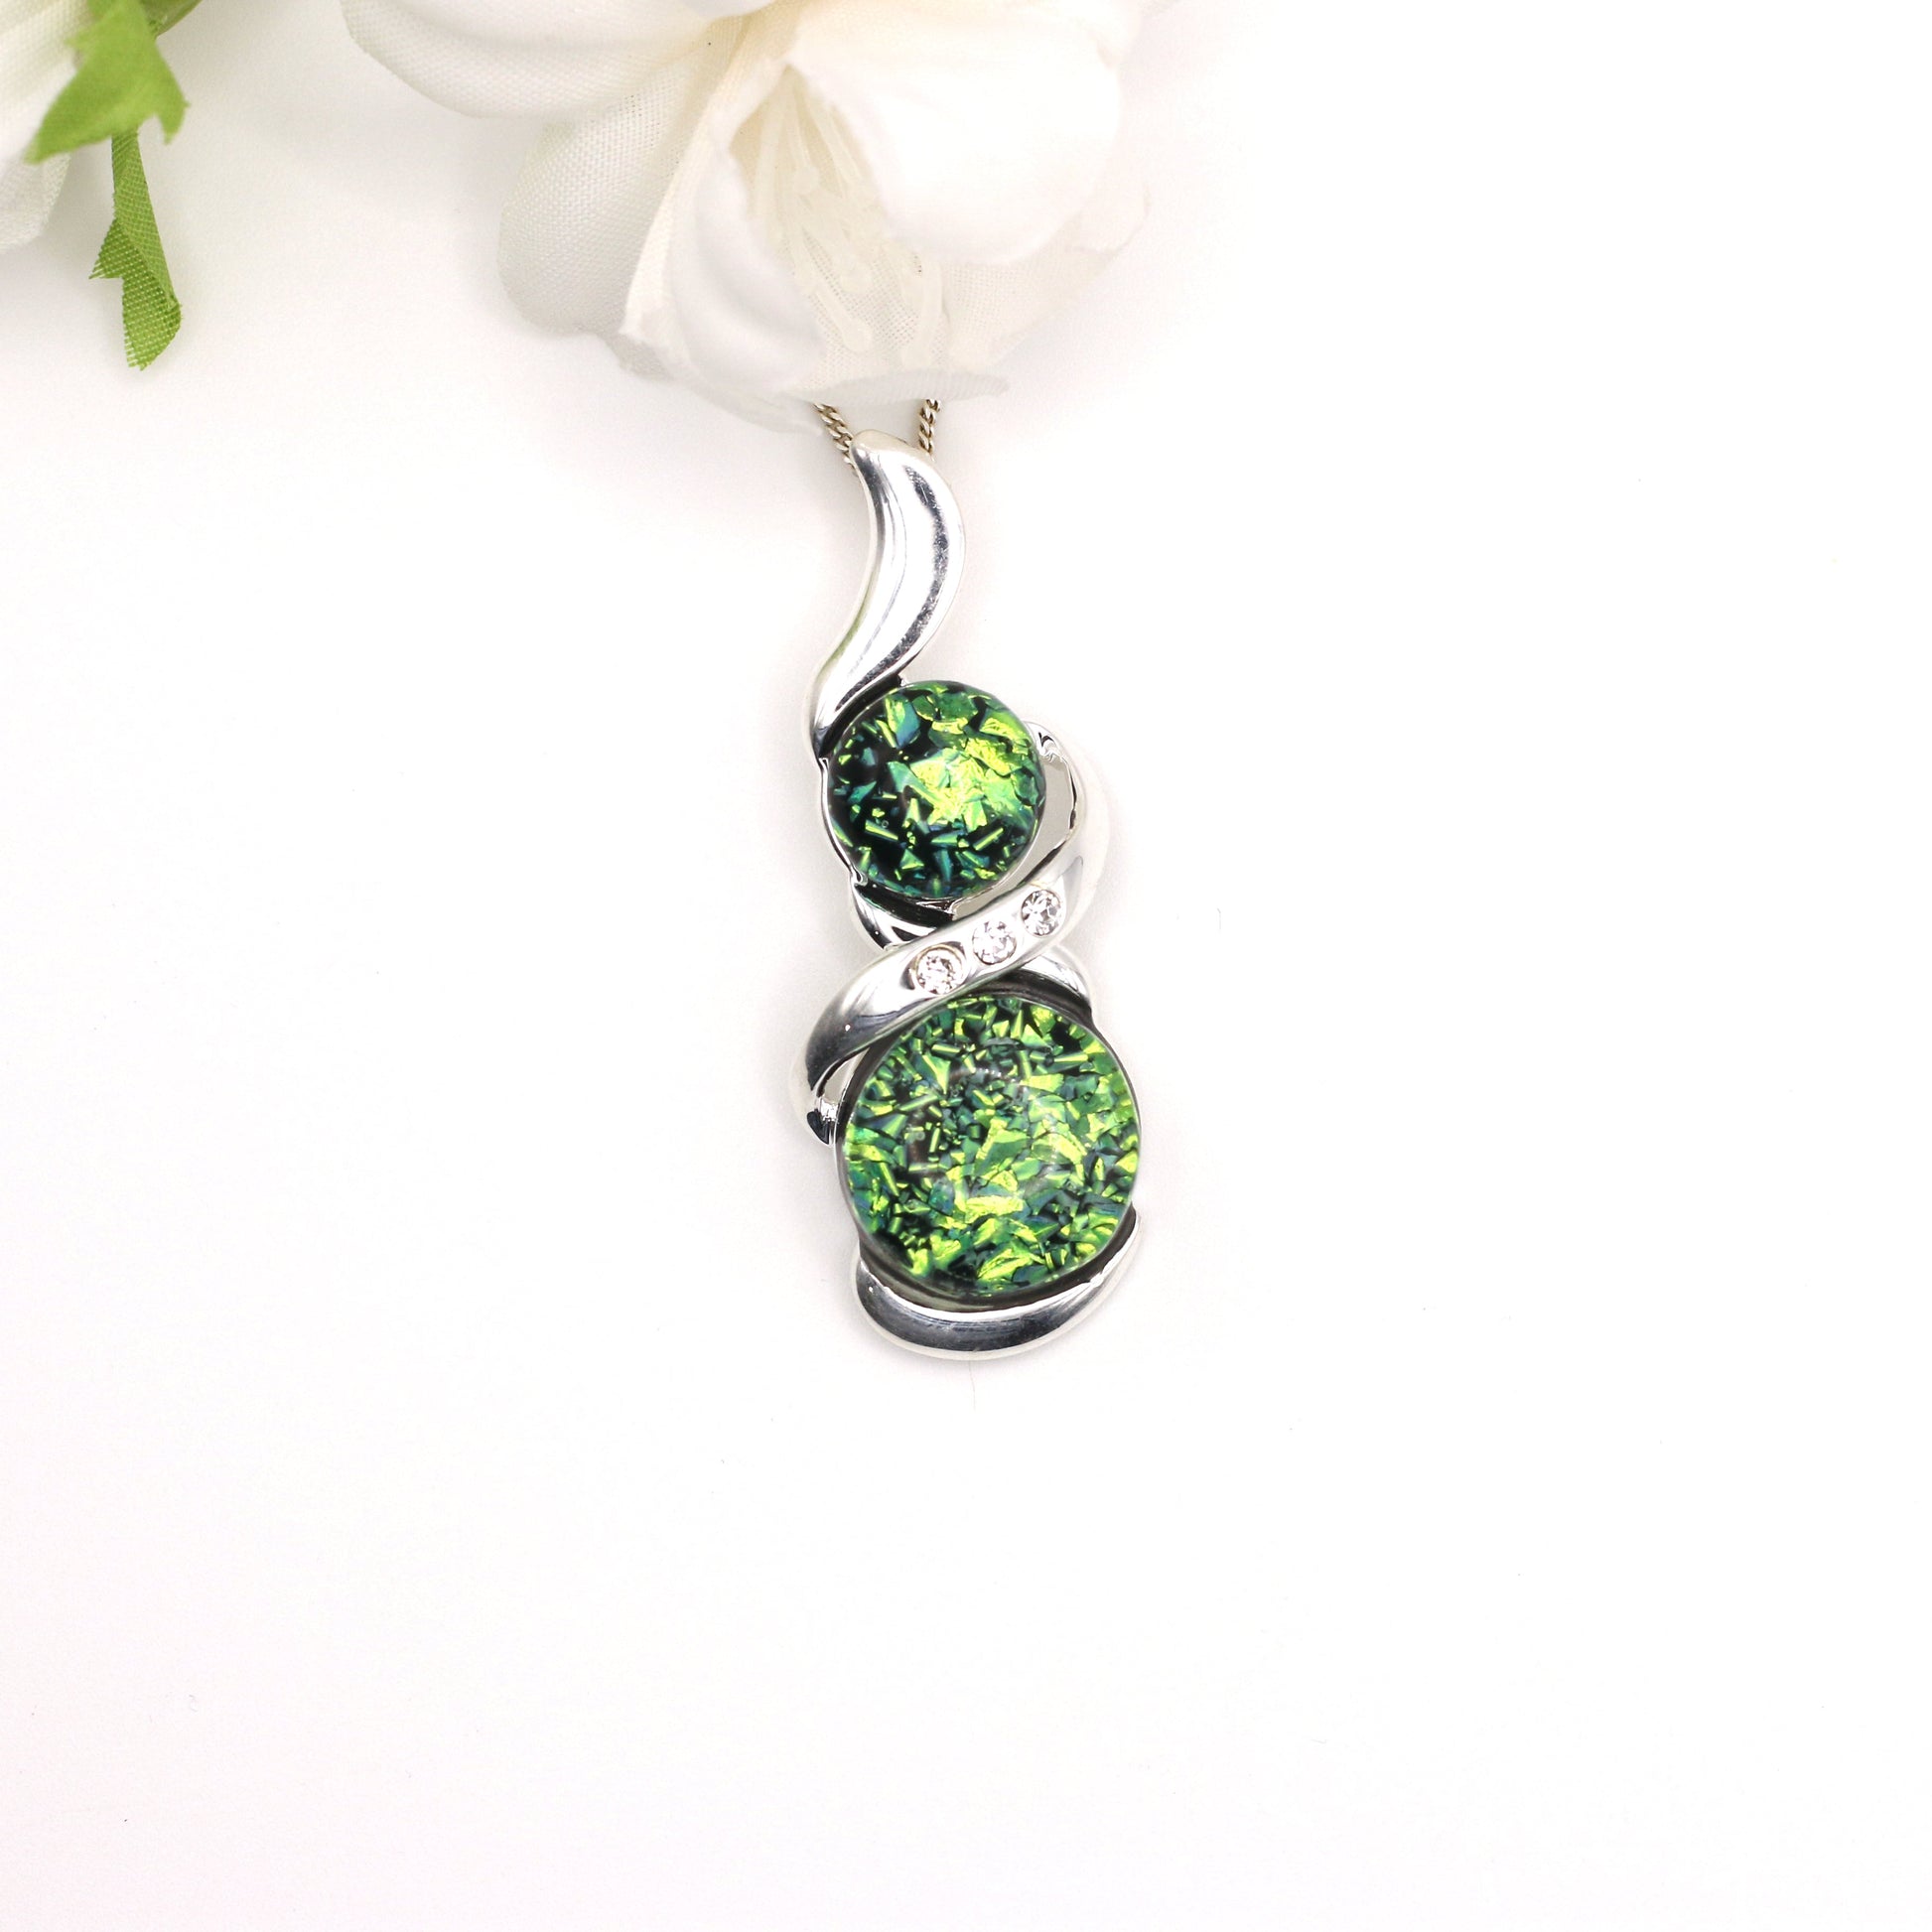 Sash Fused Glass Necklace - 3692